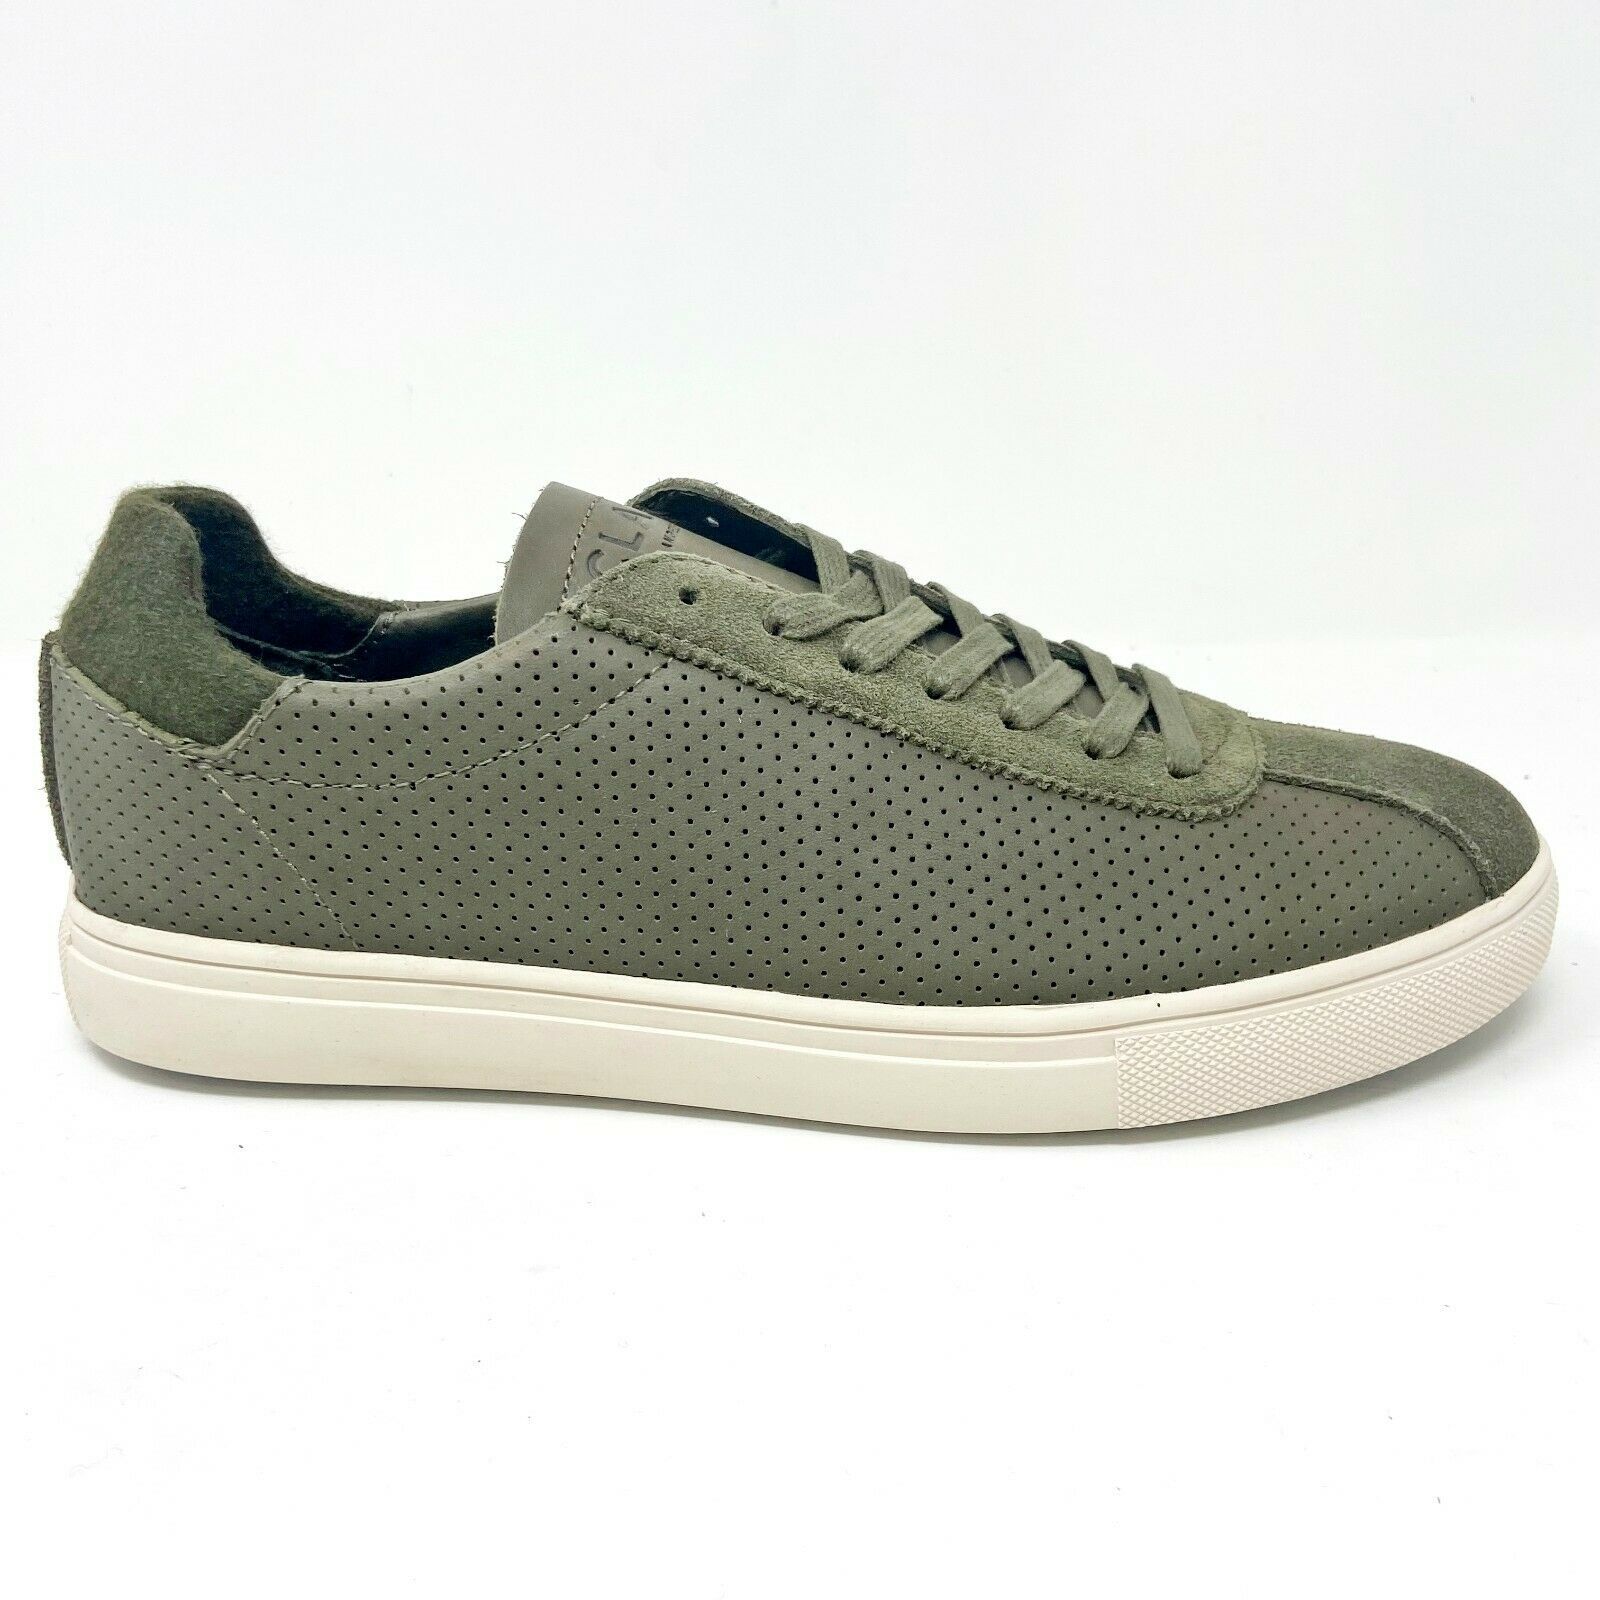 Primary image for Clae Noah Olive Green Leather Mens Casual Sneakers